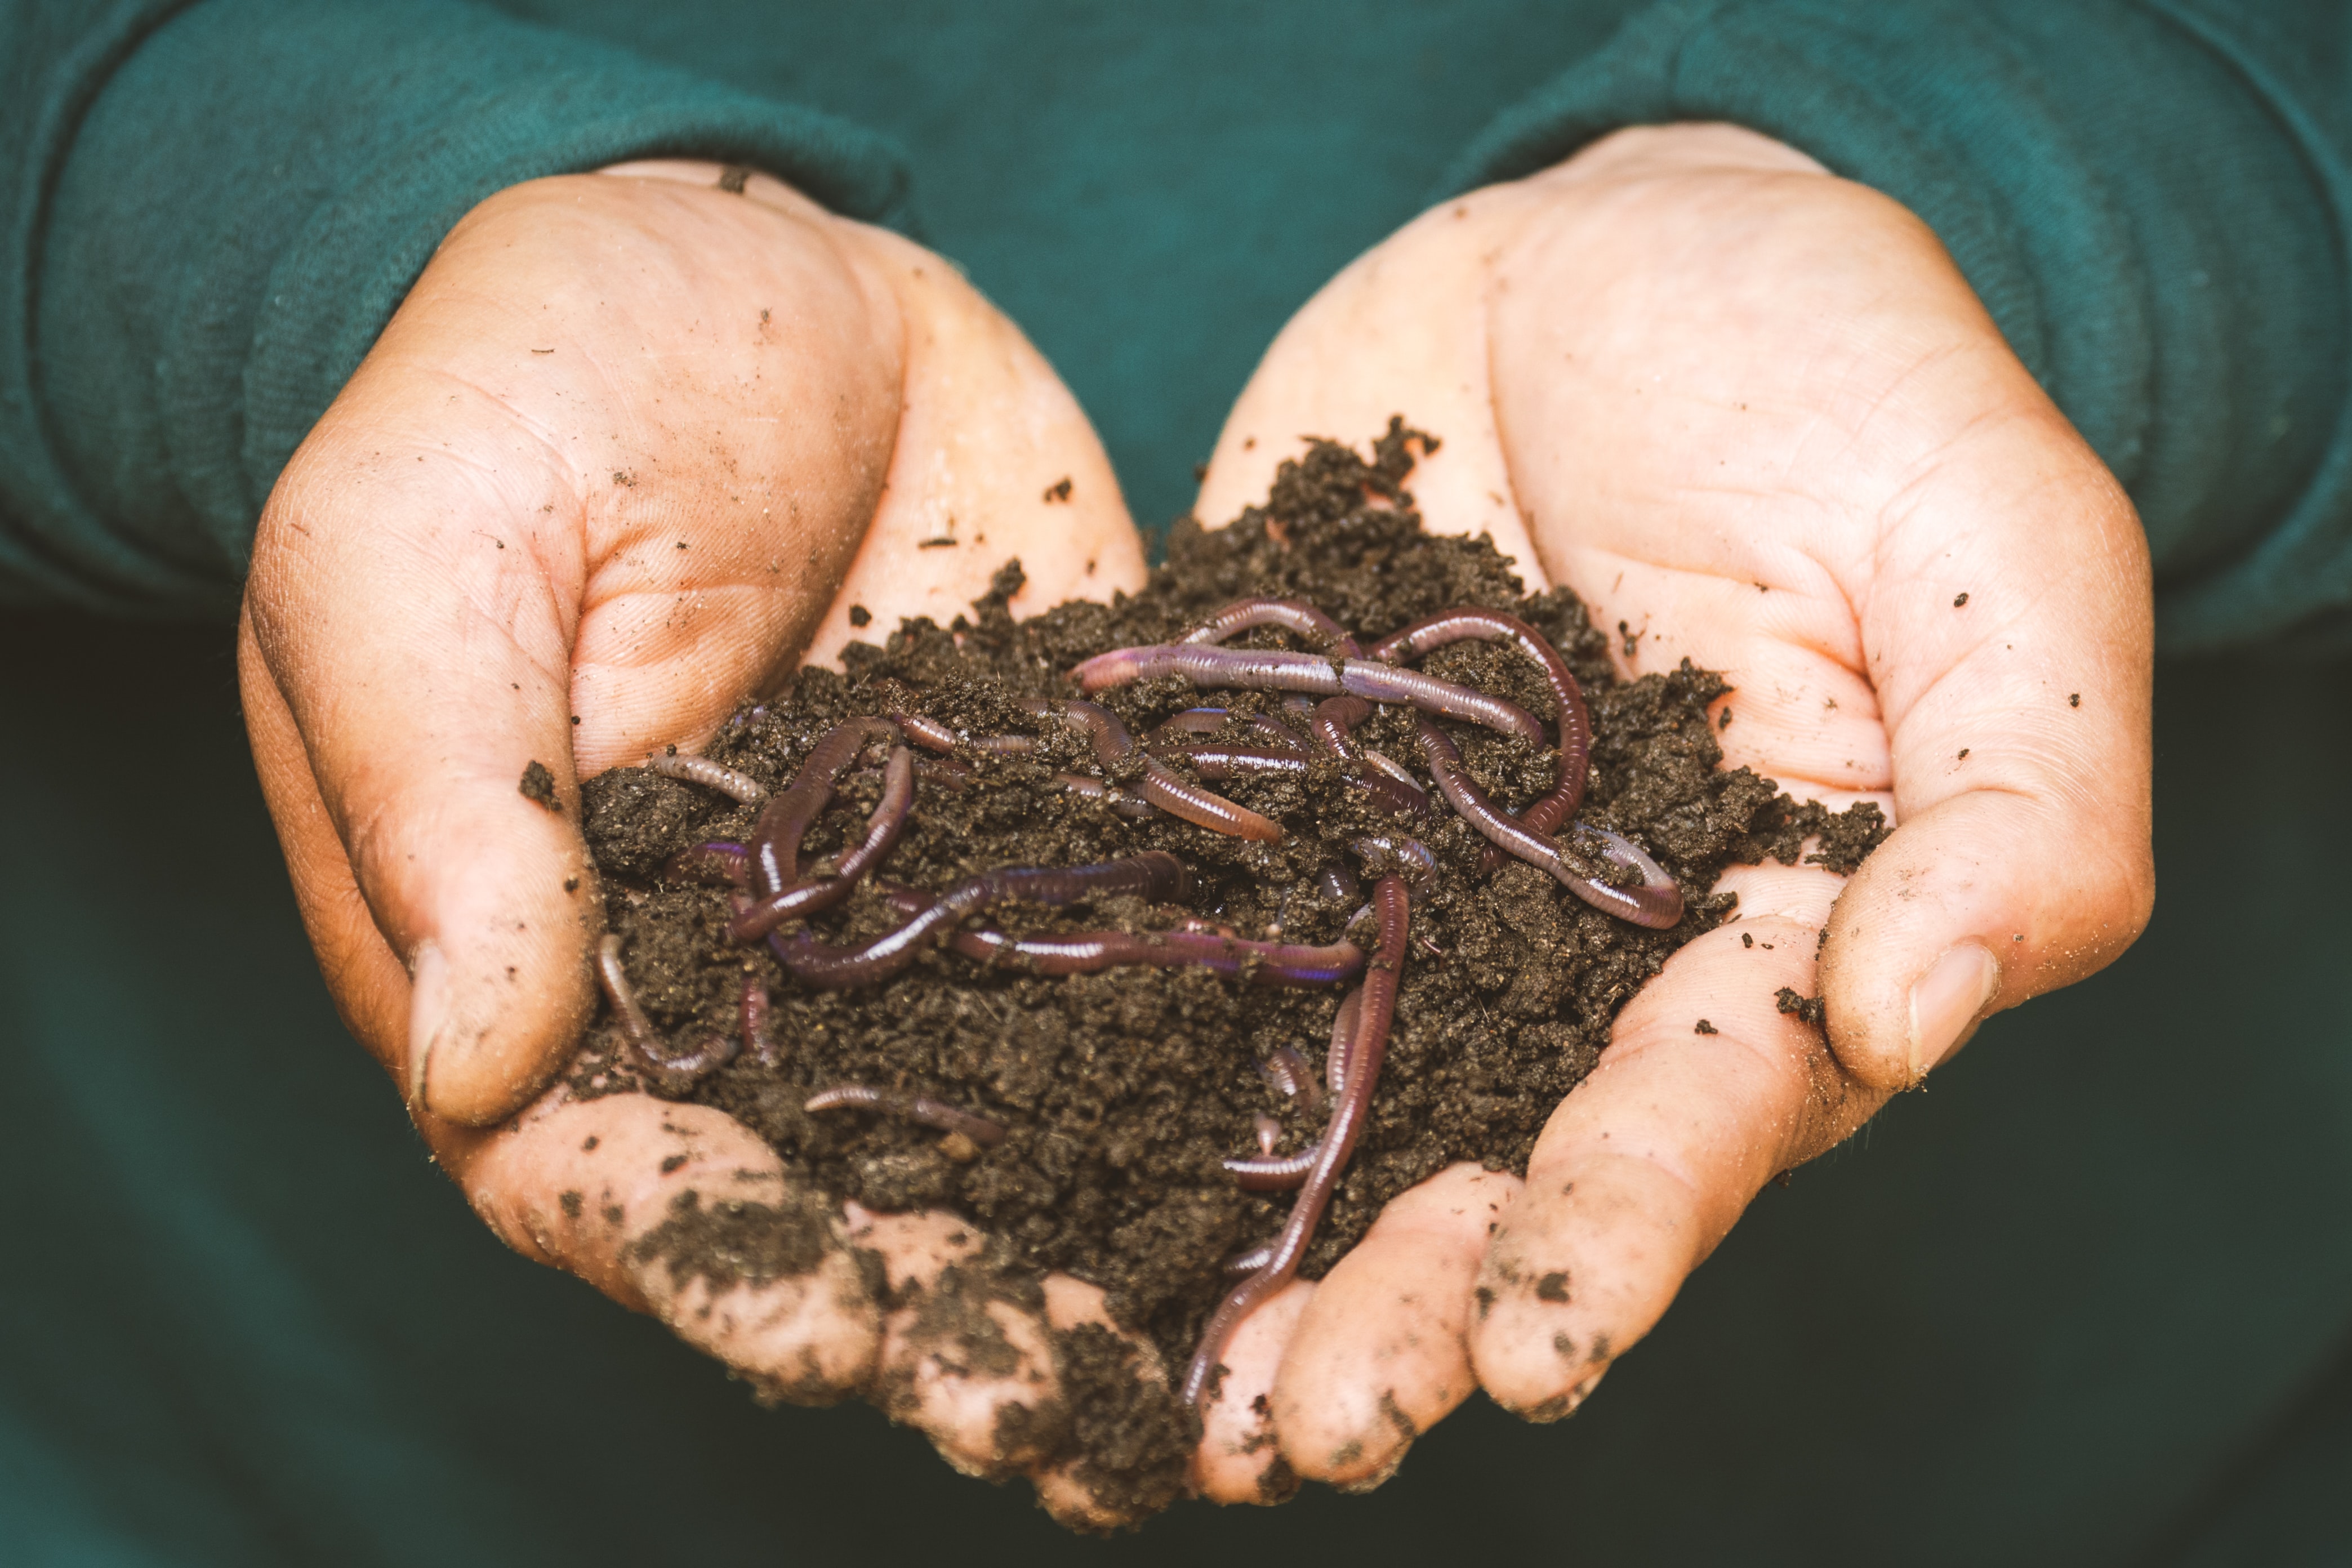 A hand full of earthworms